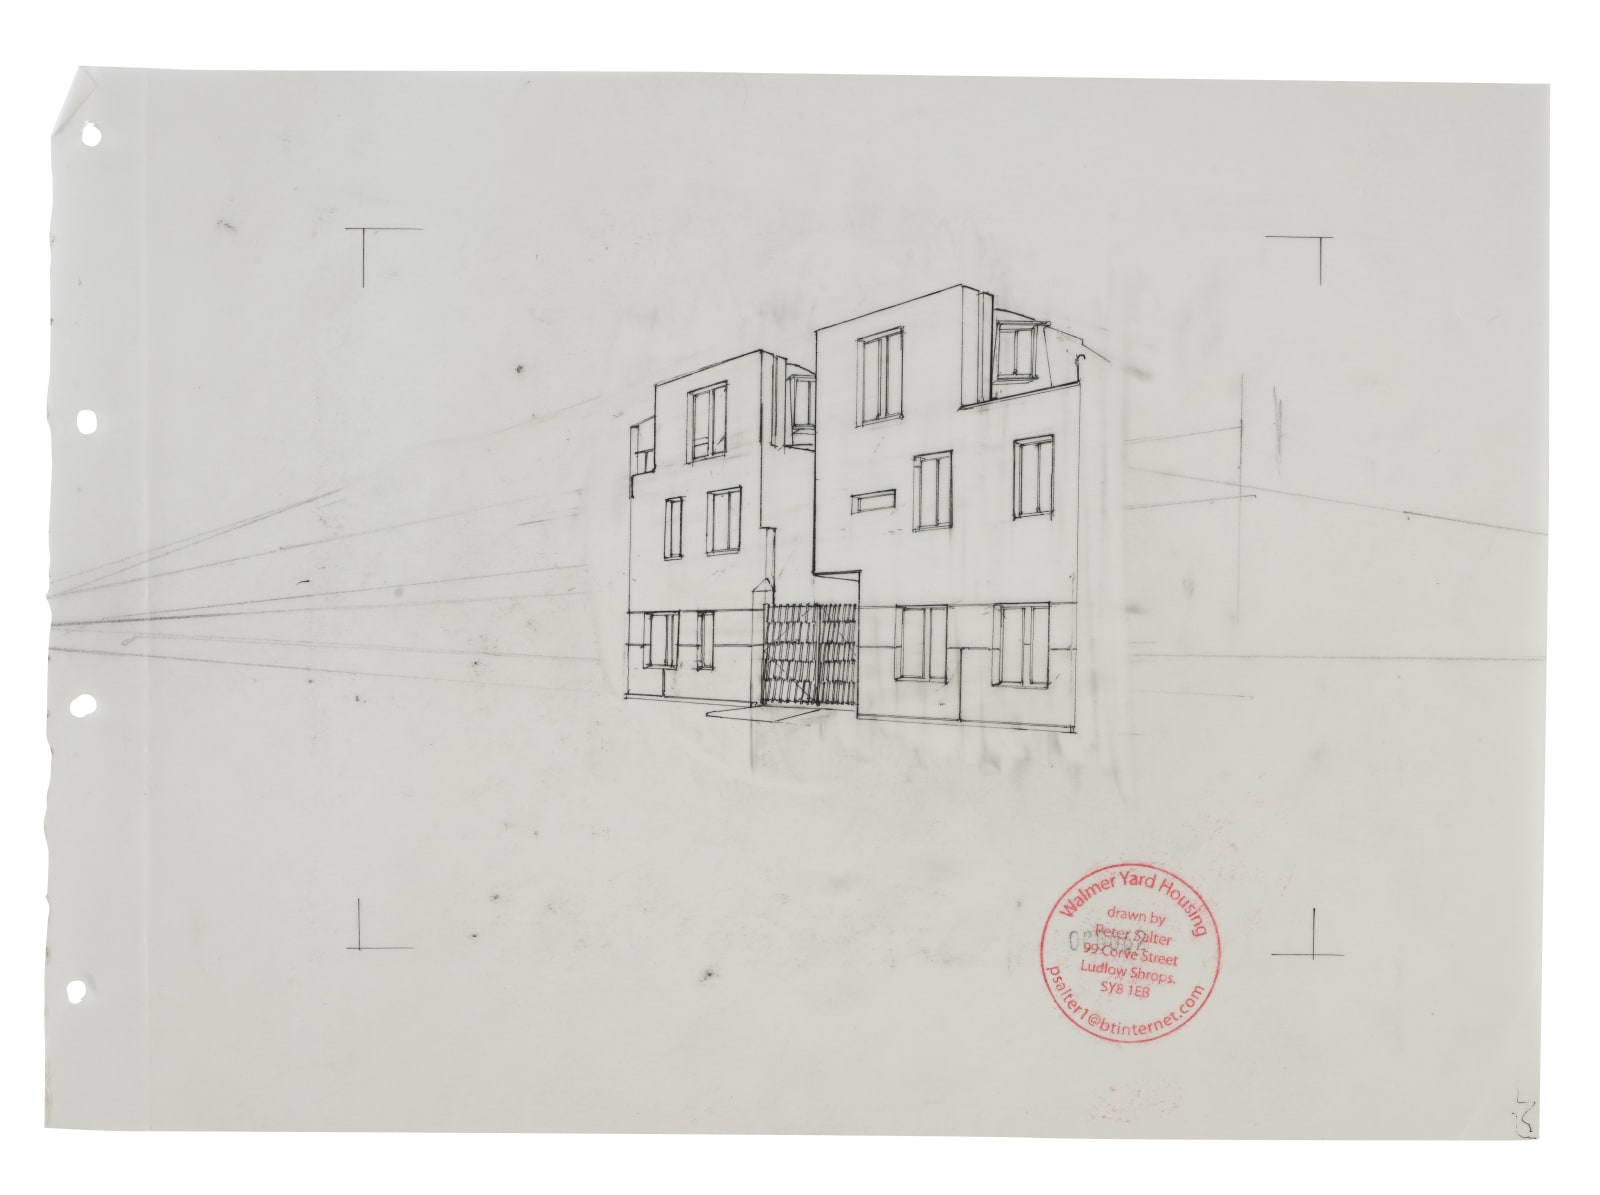 Peter Salter, Perspective of Walmer Road elevation, 2006